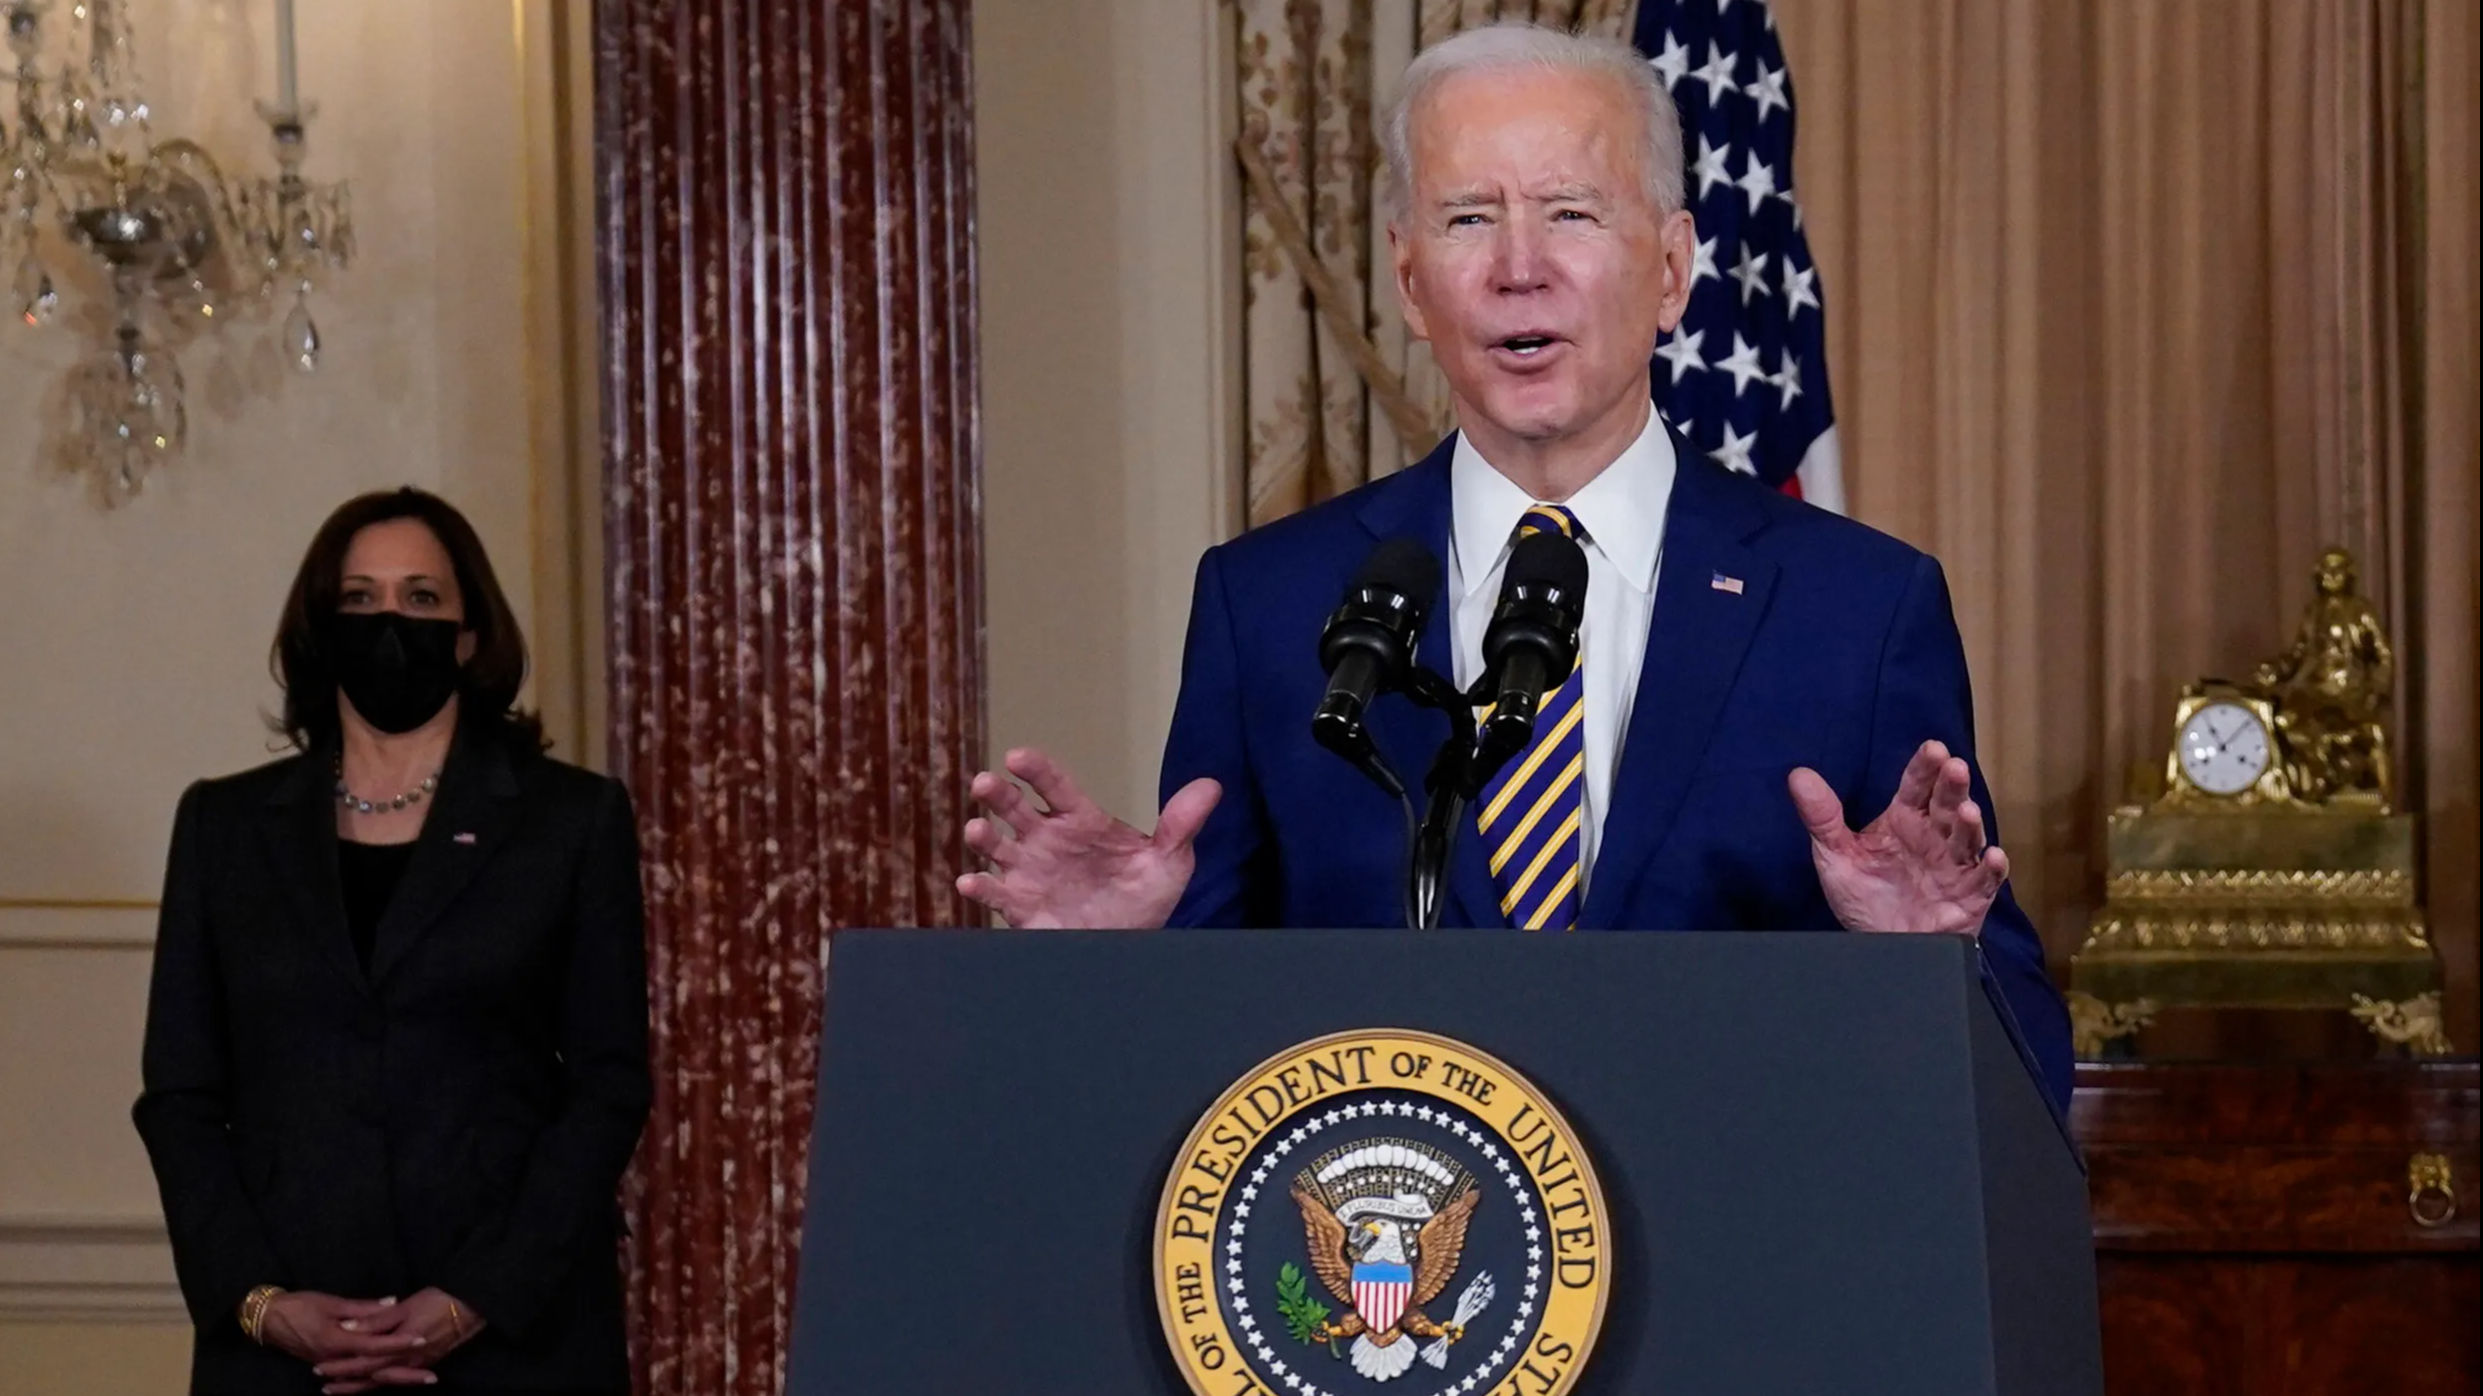 Biden admin proposes 18-month delay in calculating prevailing wages H-1B visas